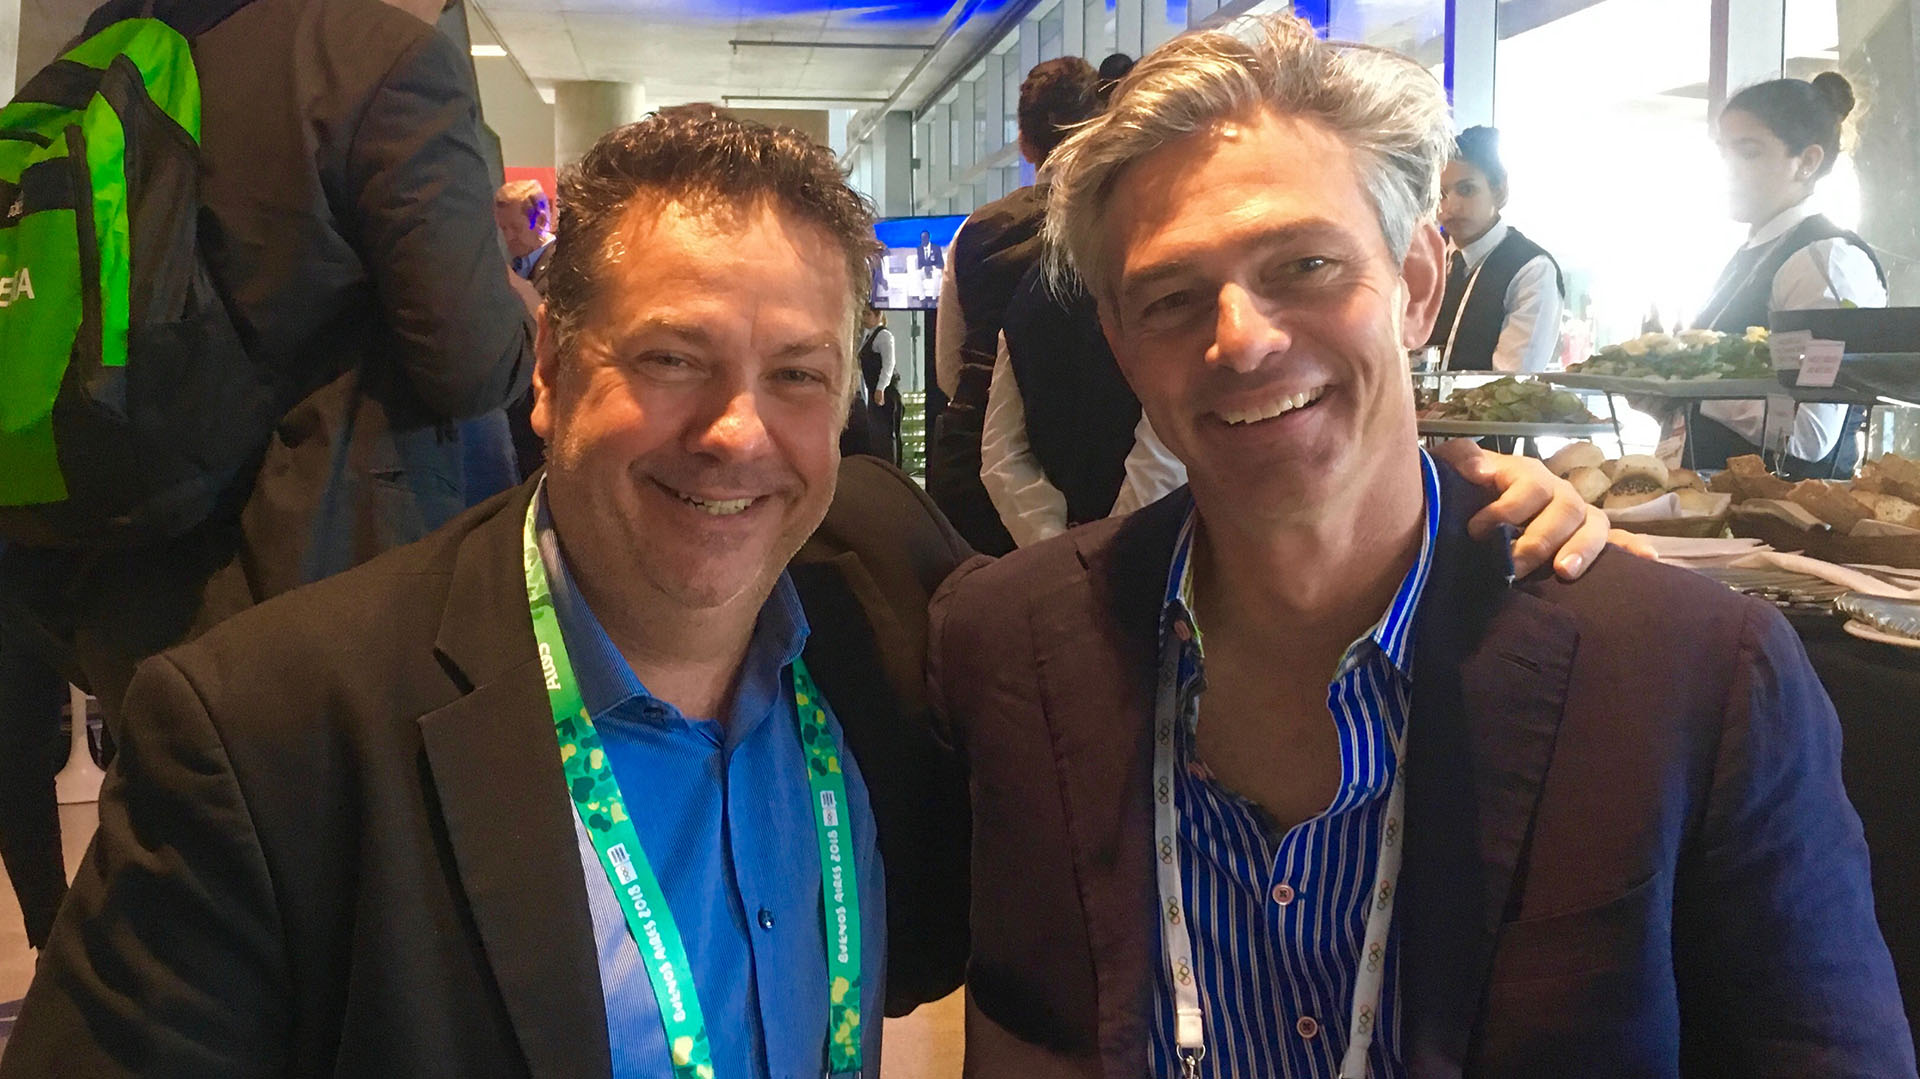 Brian Pinelli & Chris Waddell in Buenos Aires at an event prior to the 2018 Summer Youth Olympic Games (Pinelli)